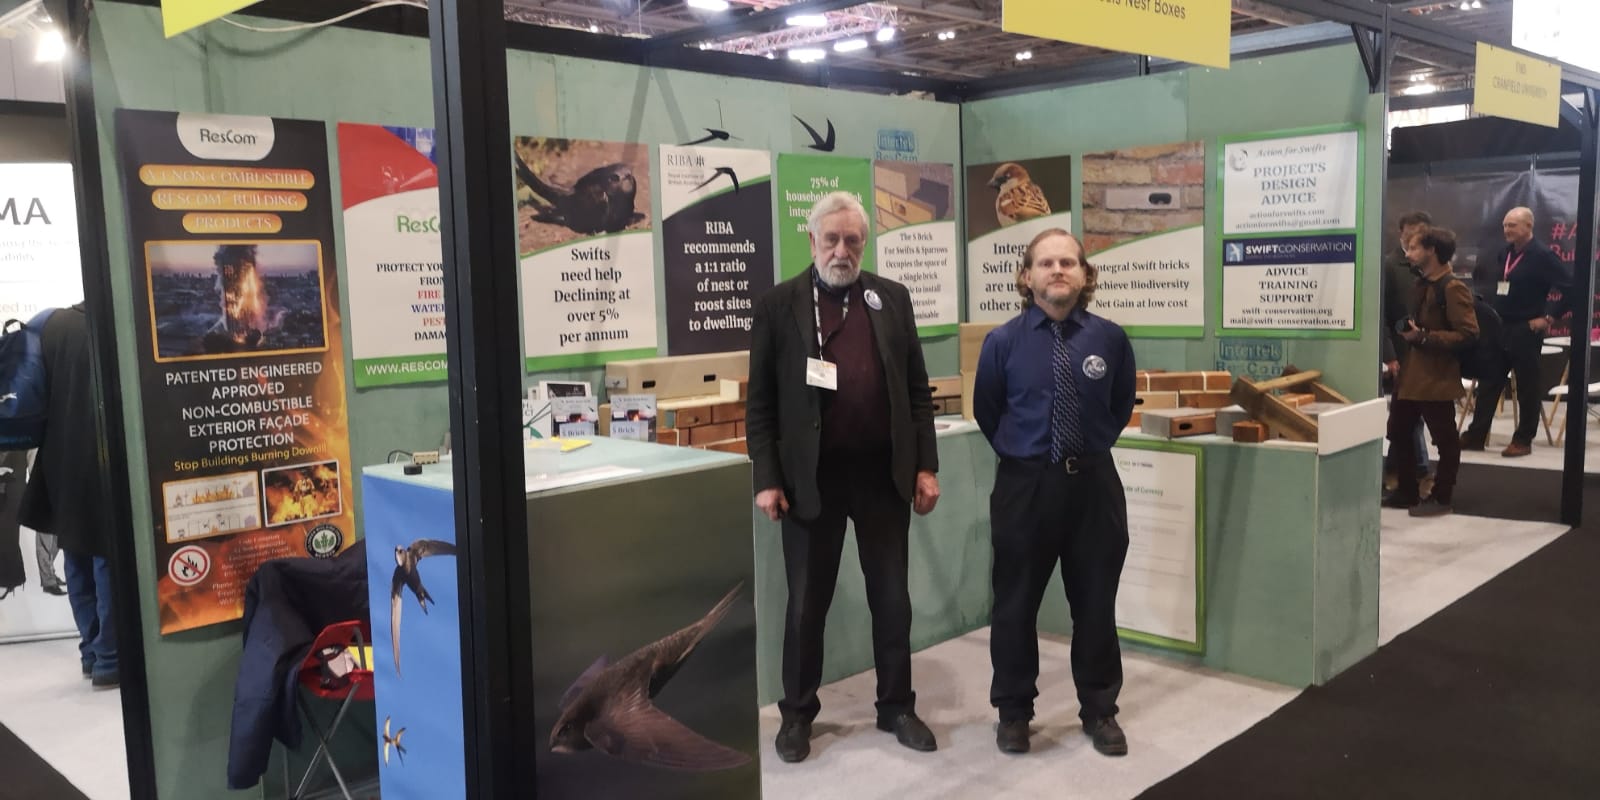 Two members of Action for Swifts at the Genesis Nest Box stand at the London Future Build Exhibition